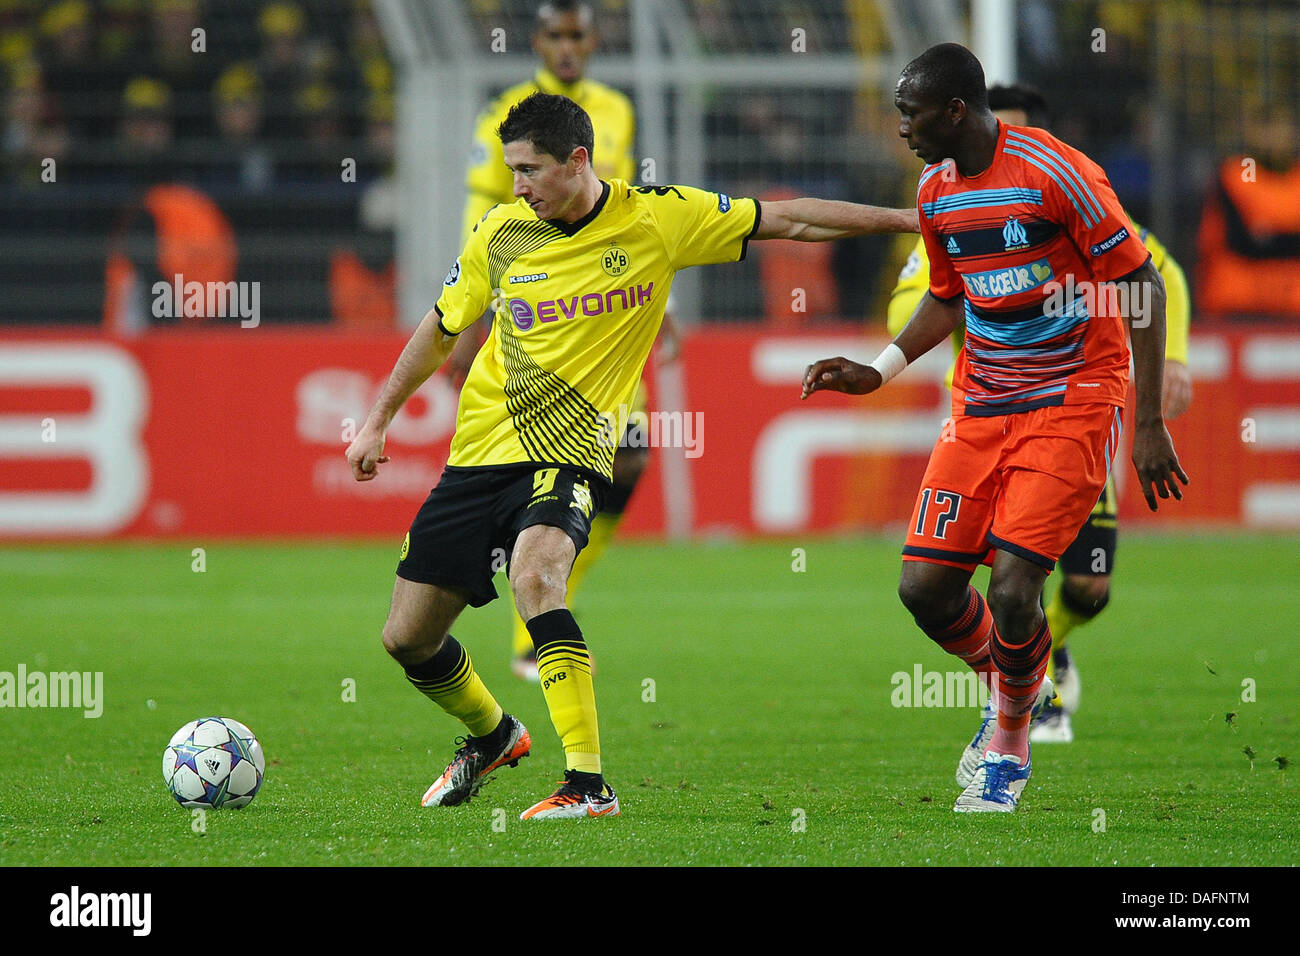 Dortmund's Robert Lewandowski (L) and Marseille's Stephane Mbia fight for the ball during the Champions League soccer match between Borussia Dortmund and Olympique Marseille at the Signal Iduna Park in Dortmund, Germany, 06 December 2011. Photo: Revierfoto Stock Photo